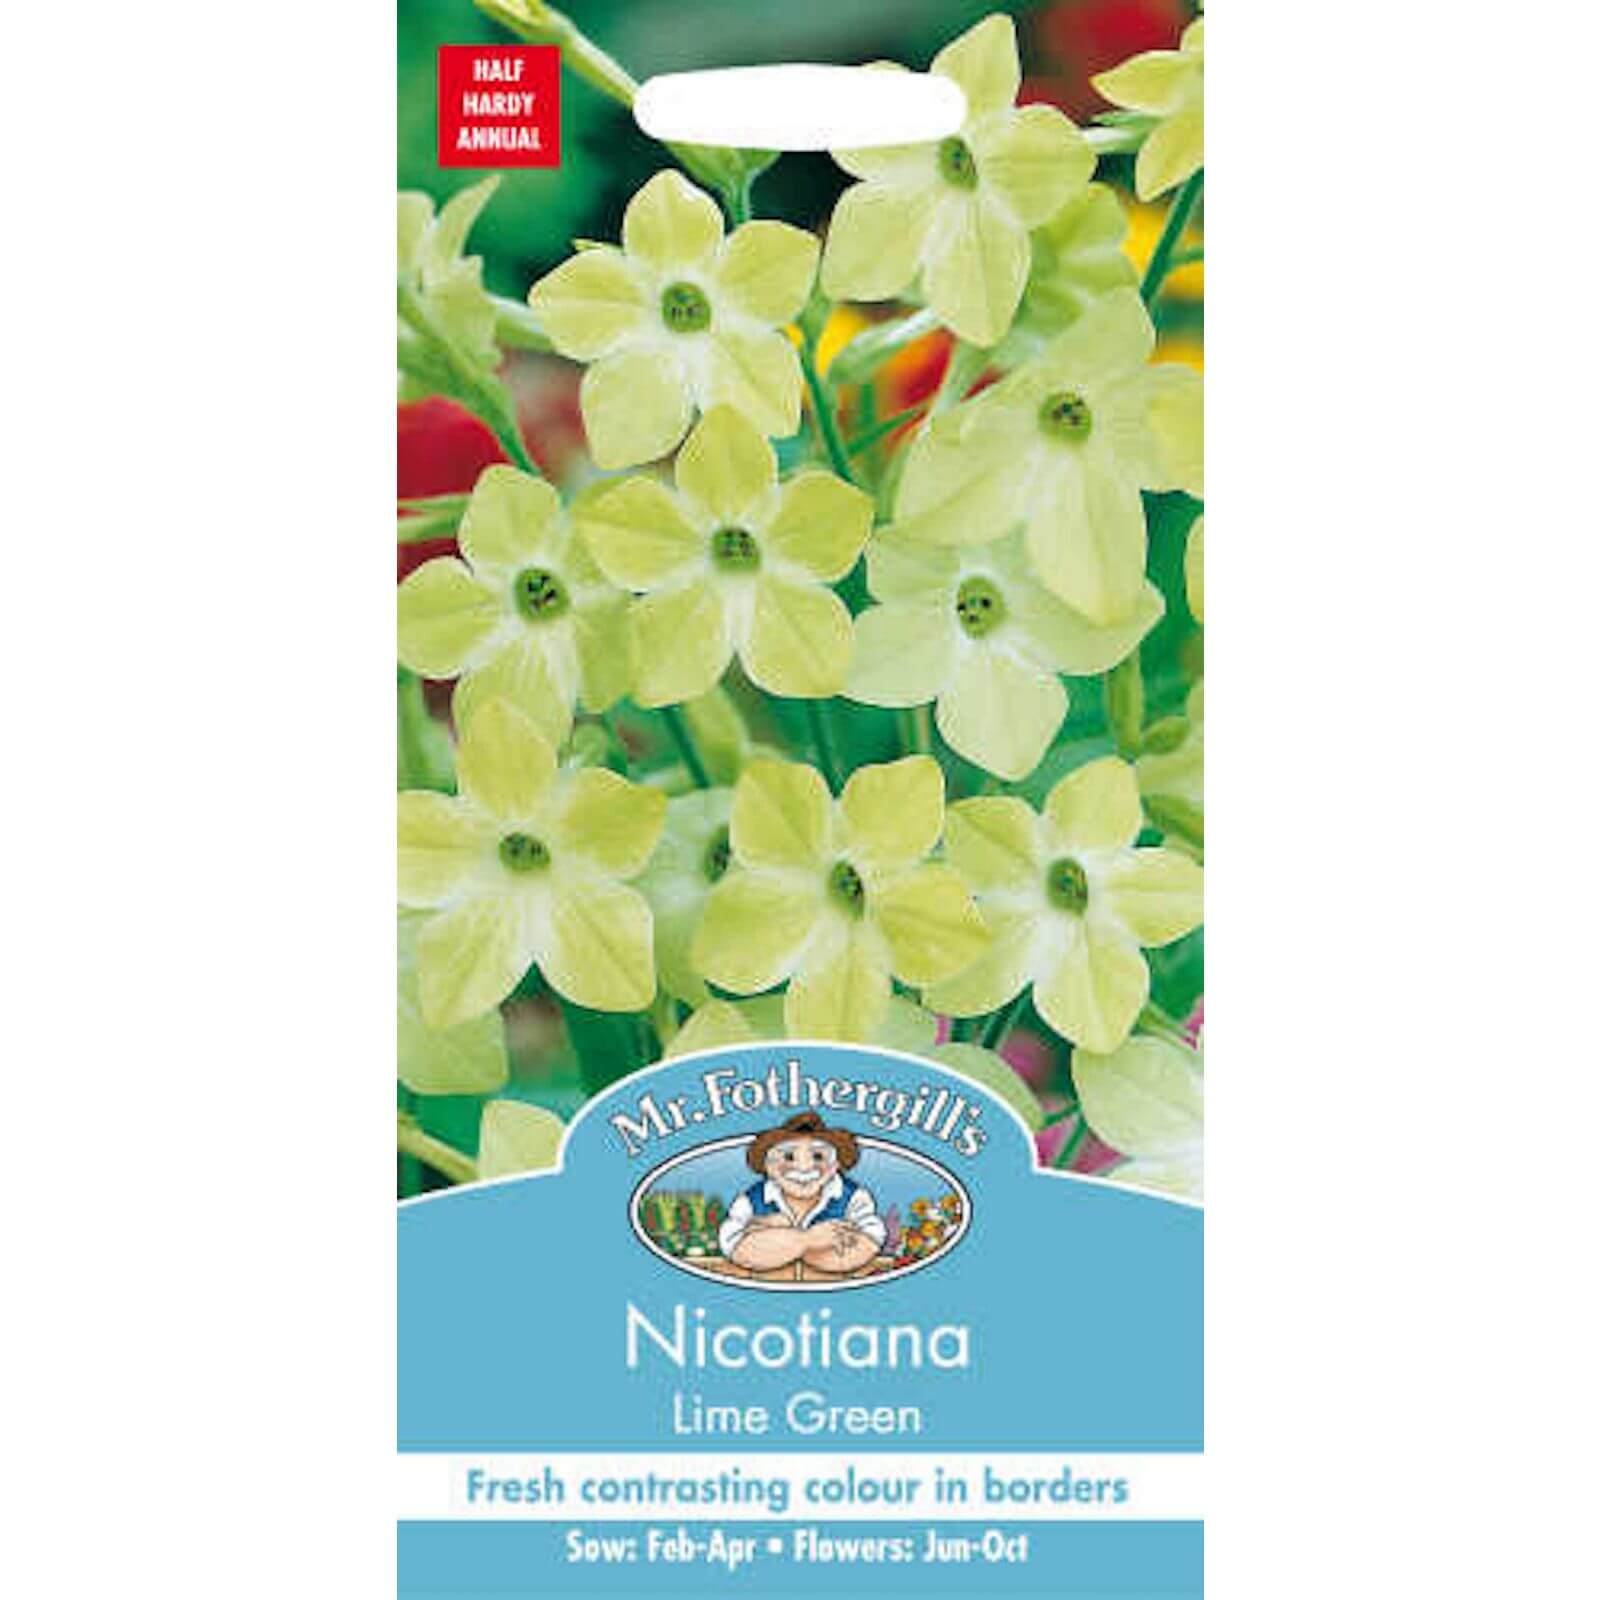 Mr. Fothergill's Nicotiana Lime Green Seeds